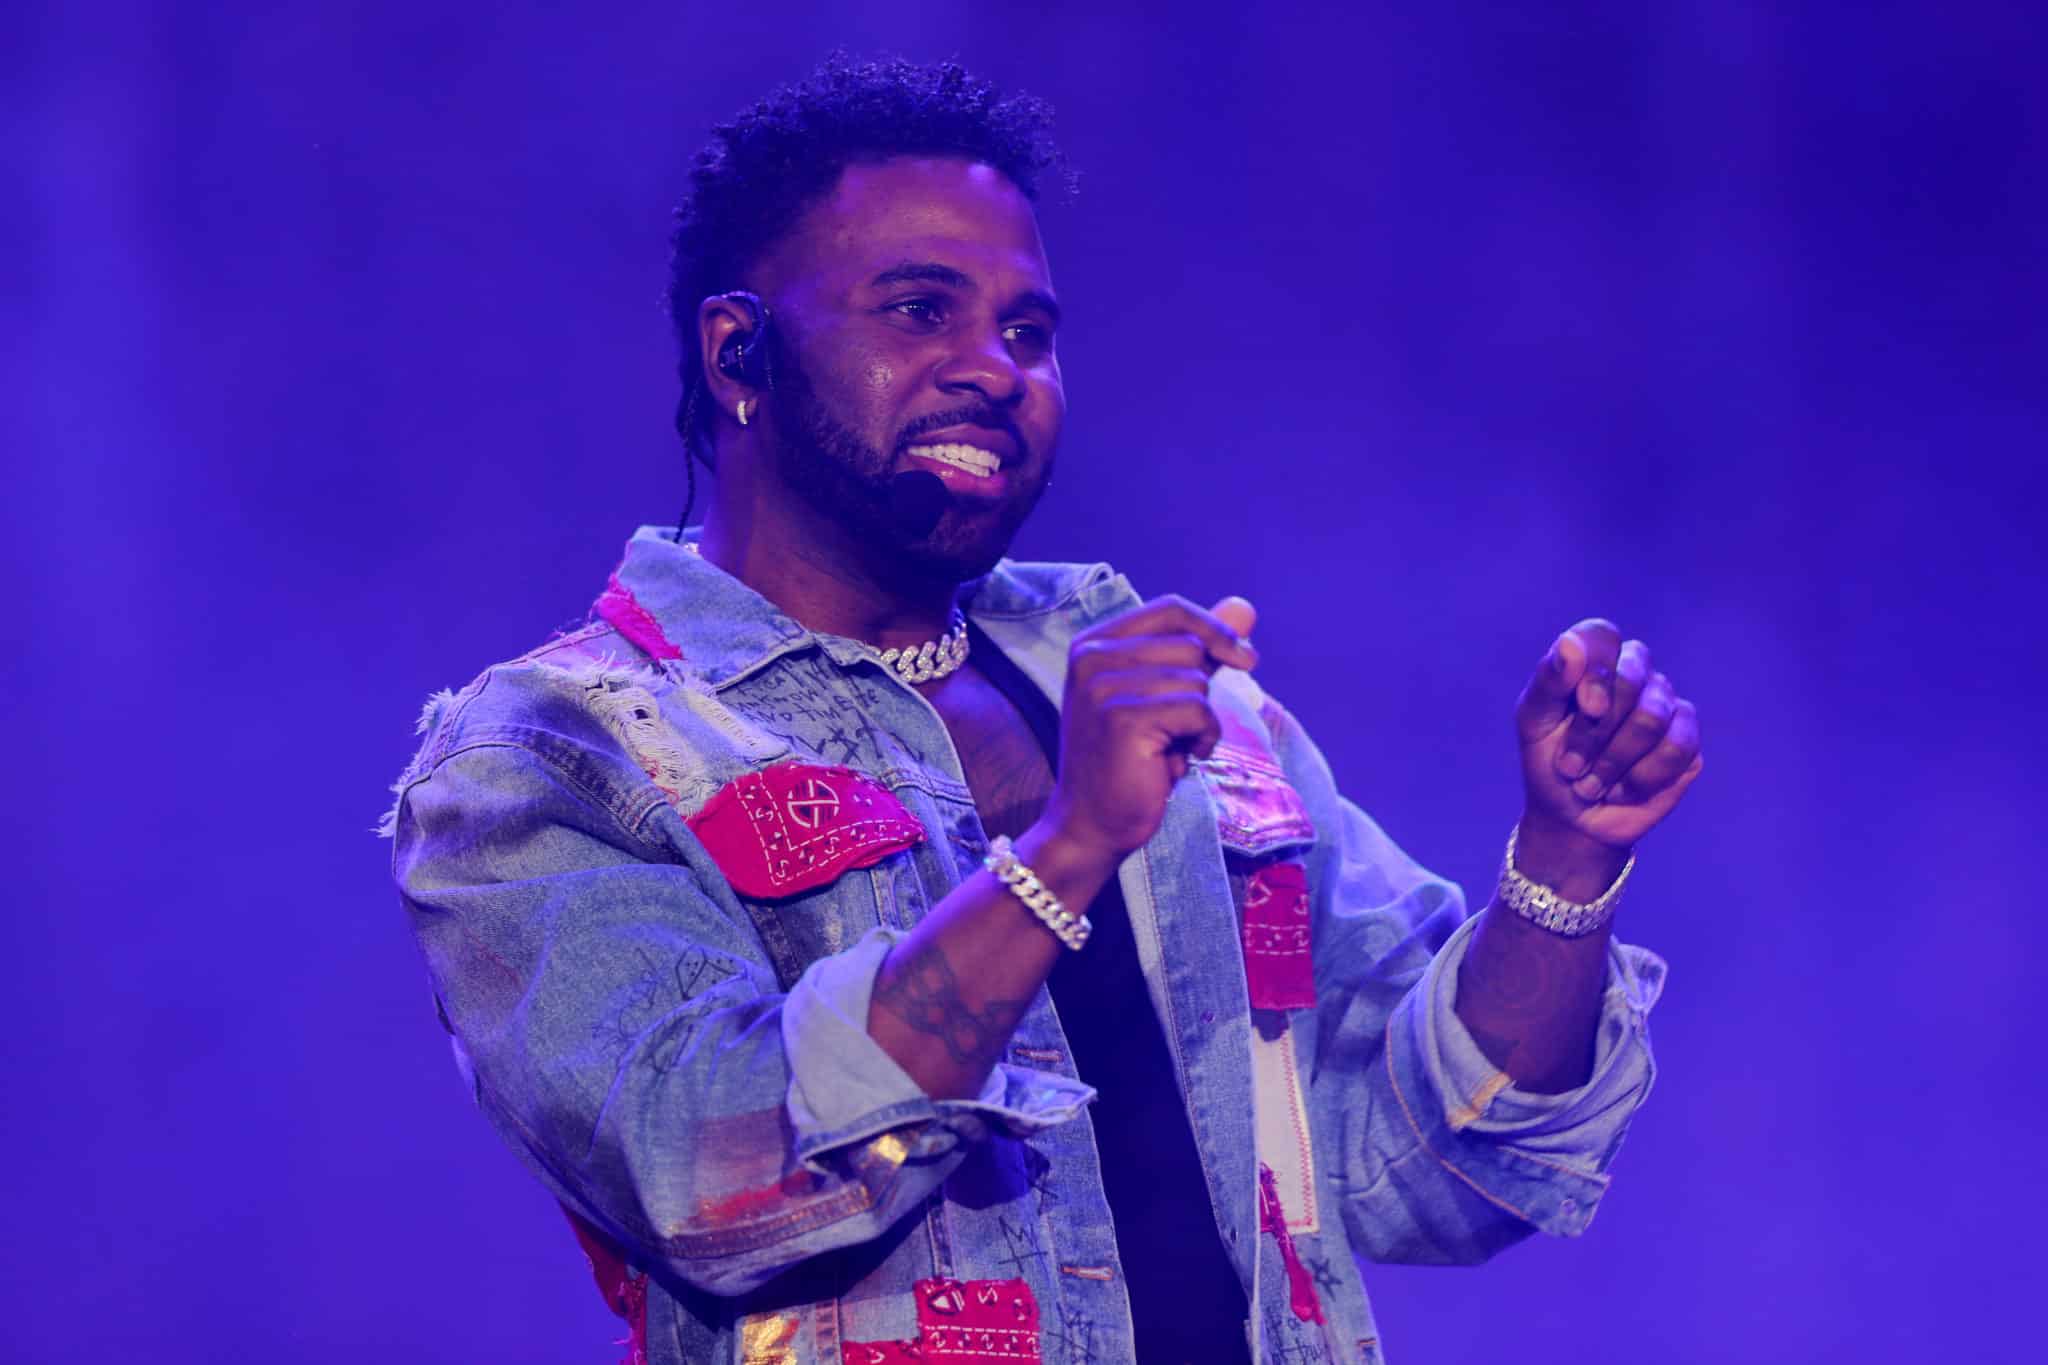 Jason Derulo to perform free concert in Titletown on June. 4 WTMJ